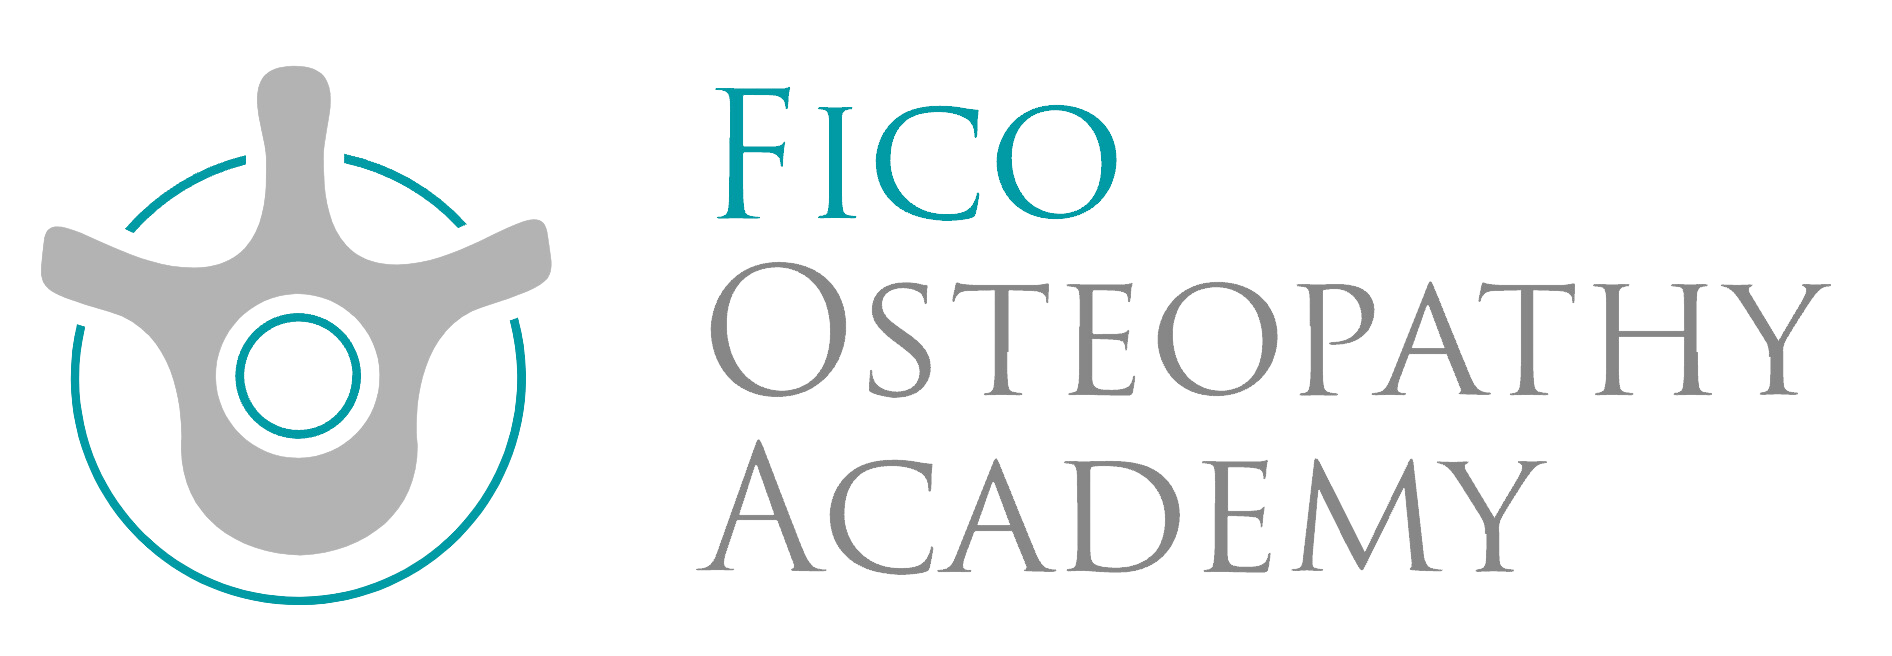 https://a.storyblok.com/f/237156/1892x656/eed925a732/osteopathy-academy.png